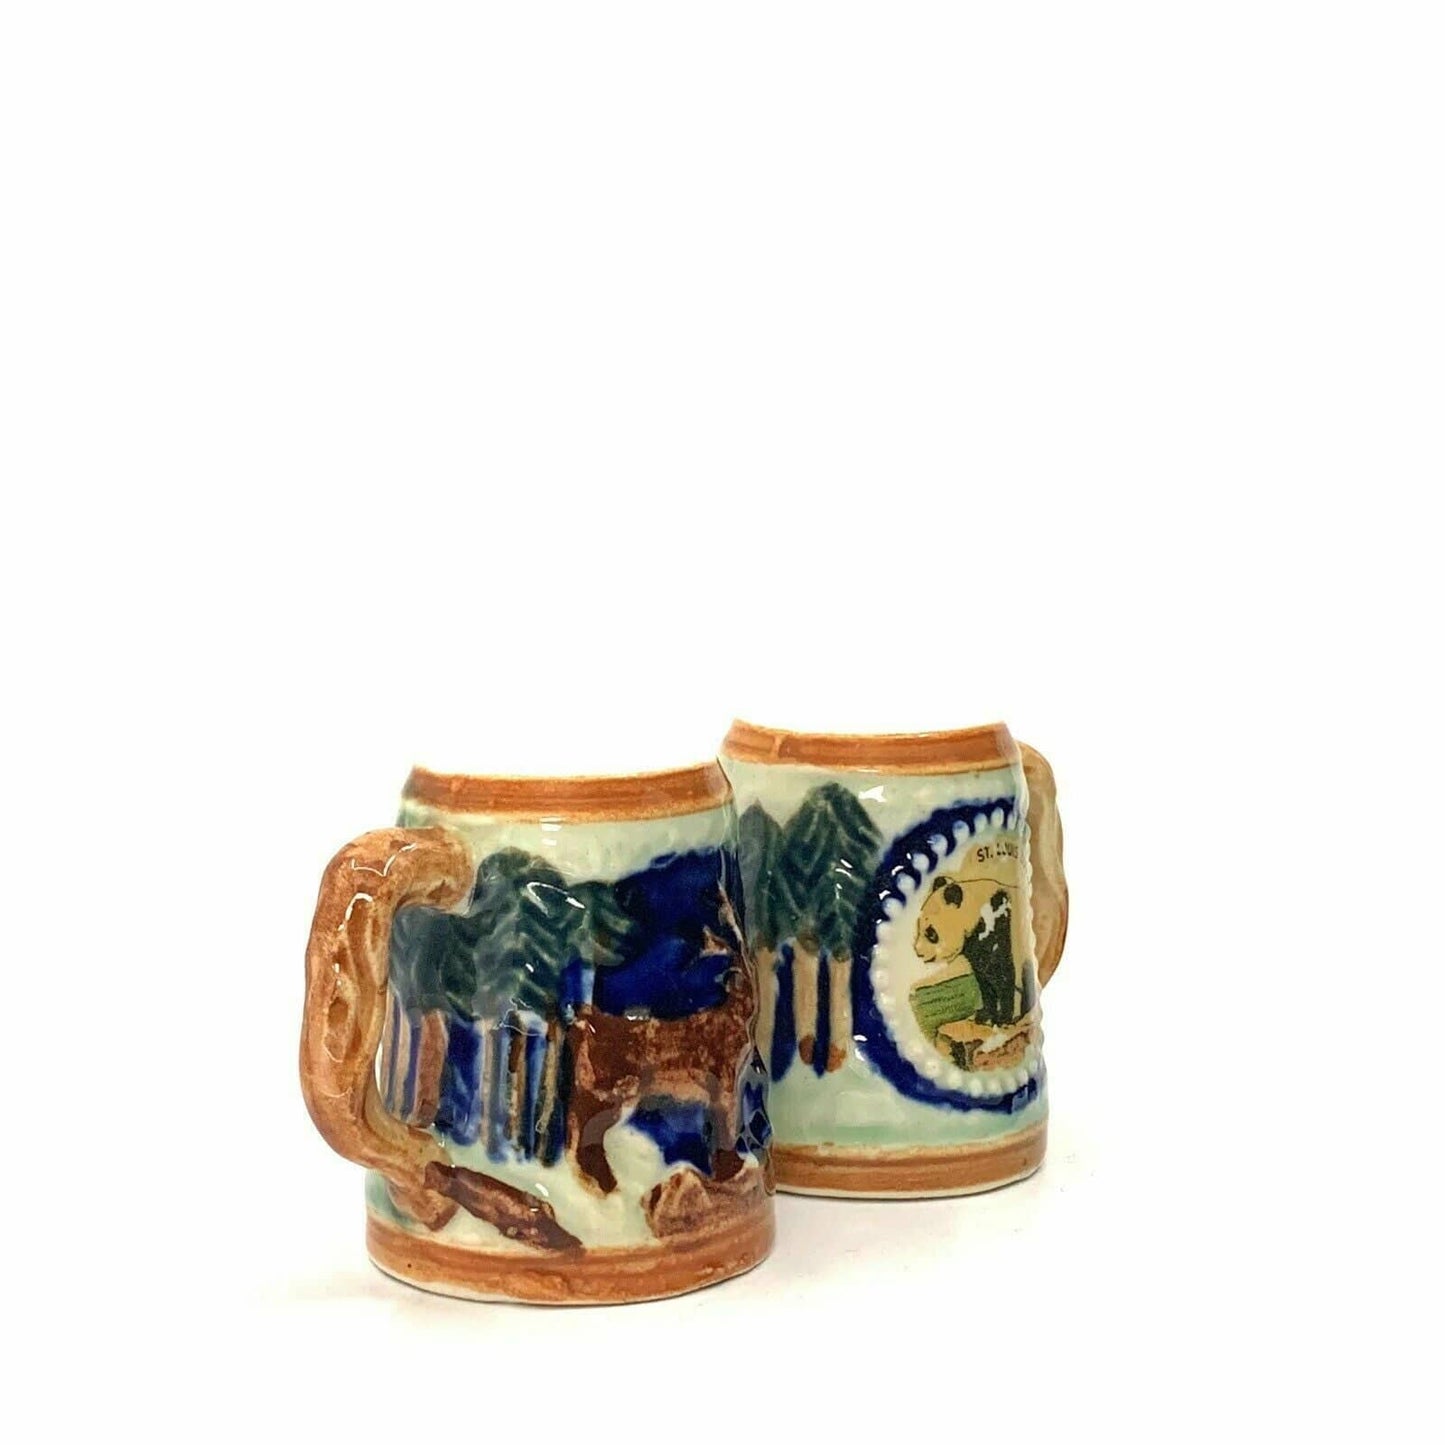 Vintage Pioneer MDSE Co St Louis Zoo Stein Salt Pepper Shakers - Vintage Nostalgic Collectible Antique Rare Charming Quirky - Very Good - Free Shipping